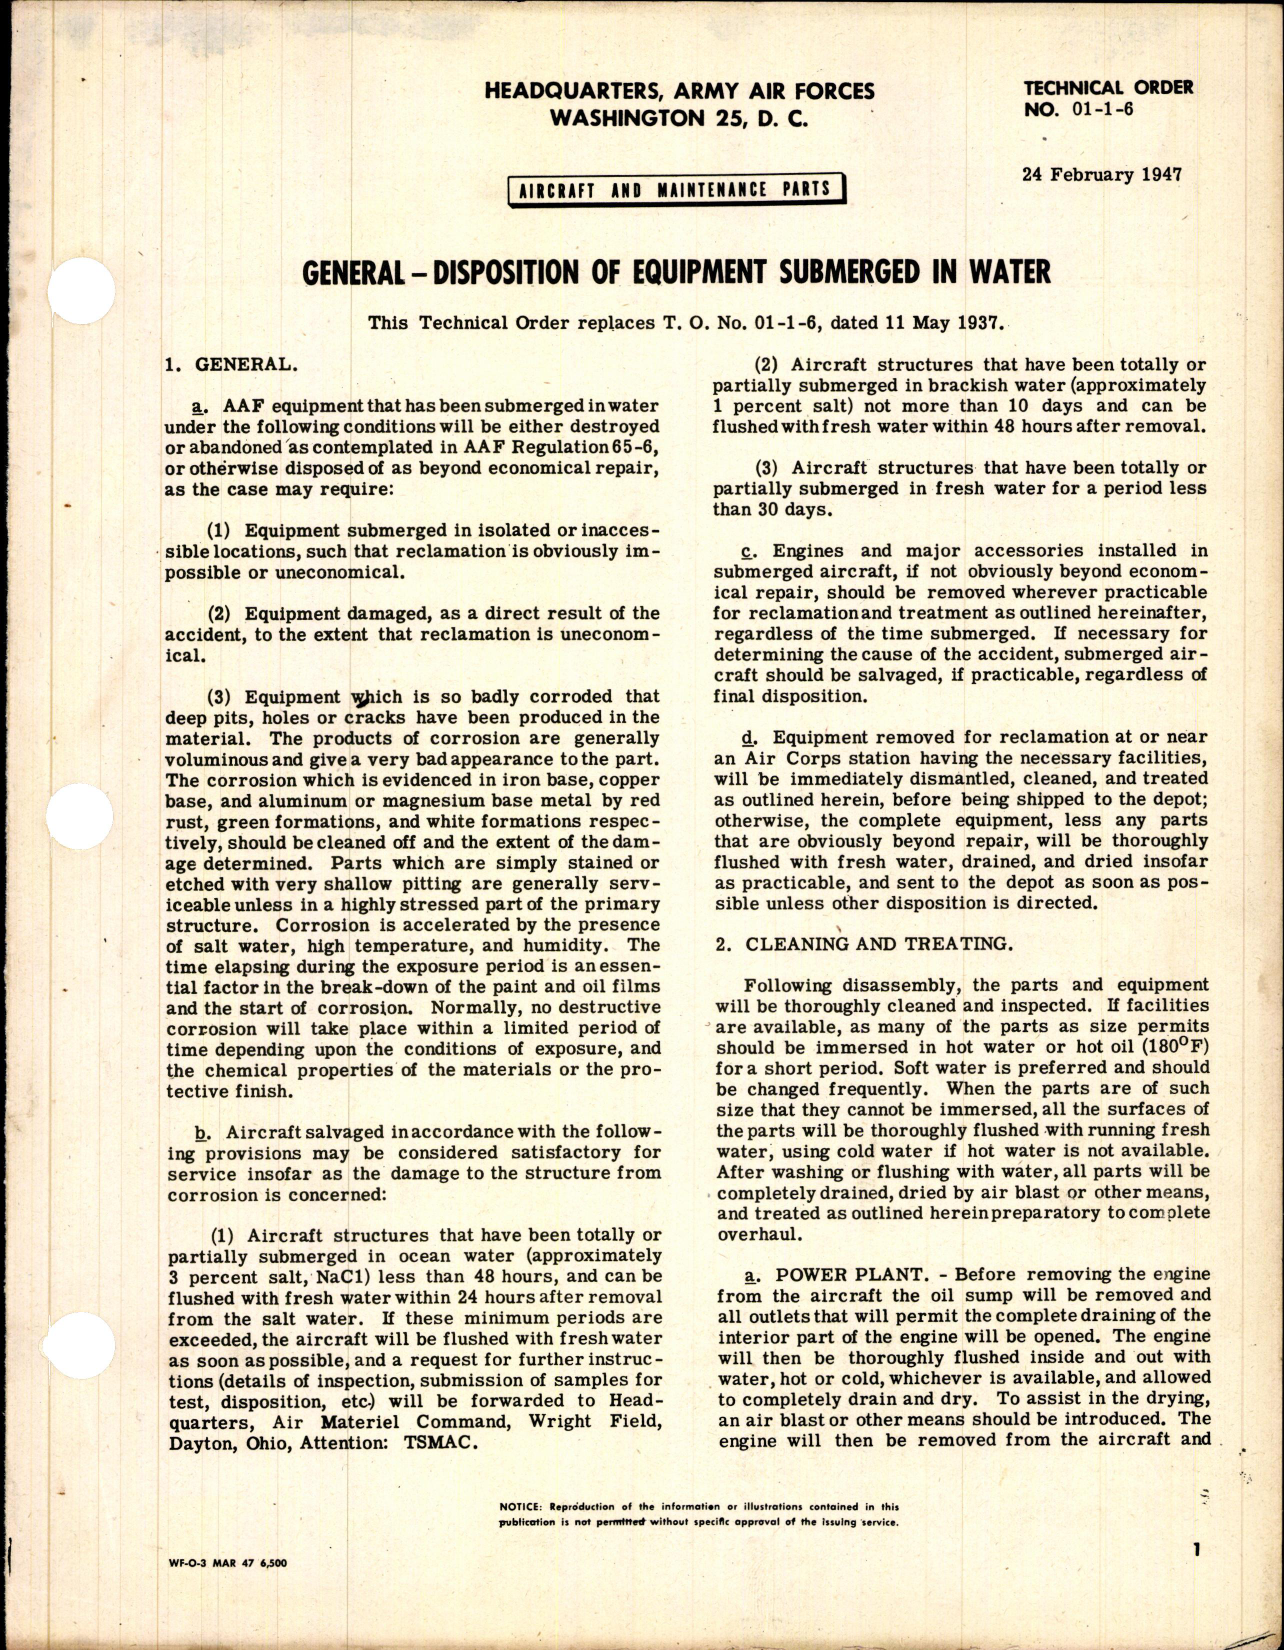 Sample page 1 from AirCorps Library document: Aircraft and Maintenance Parts; Disposition of Equipment Submerged in Water